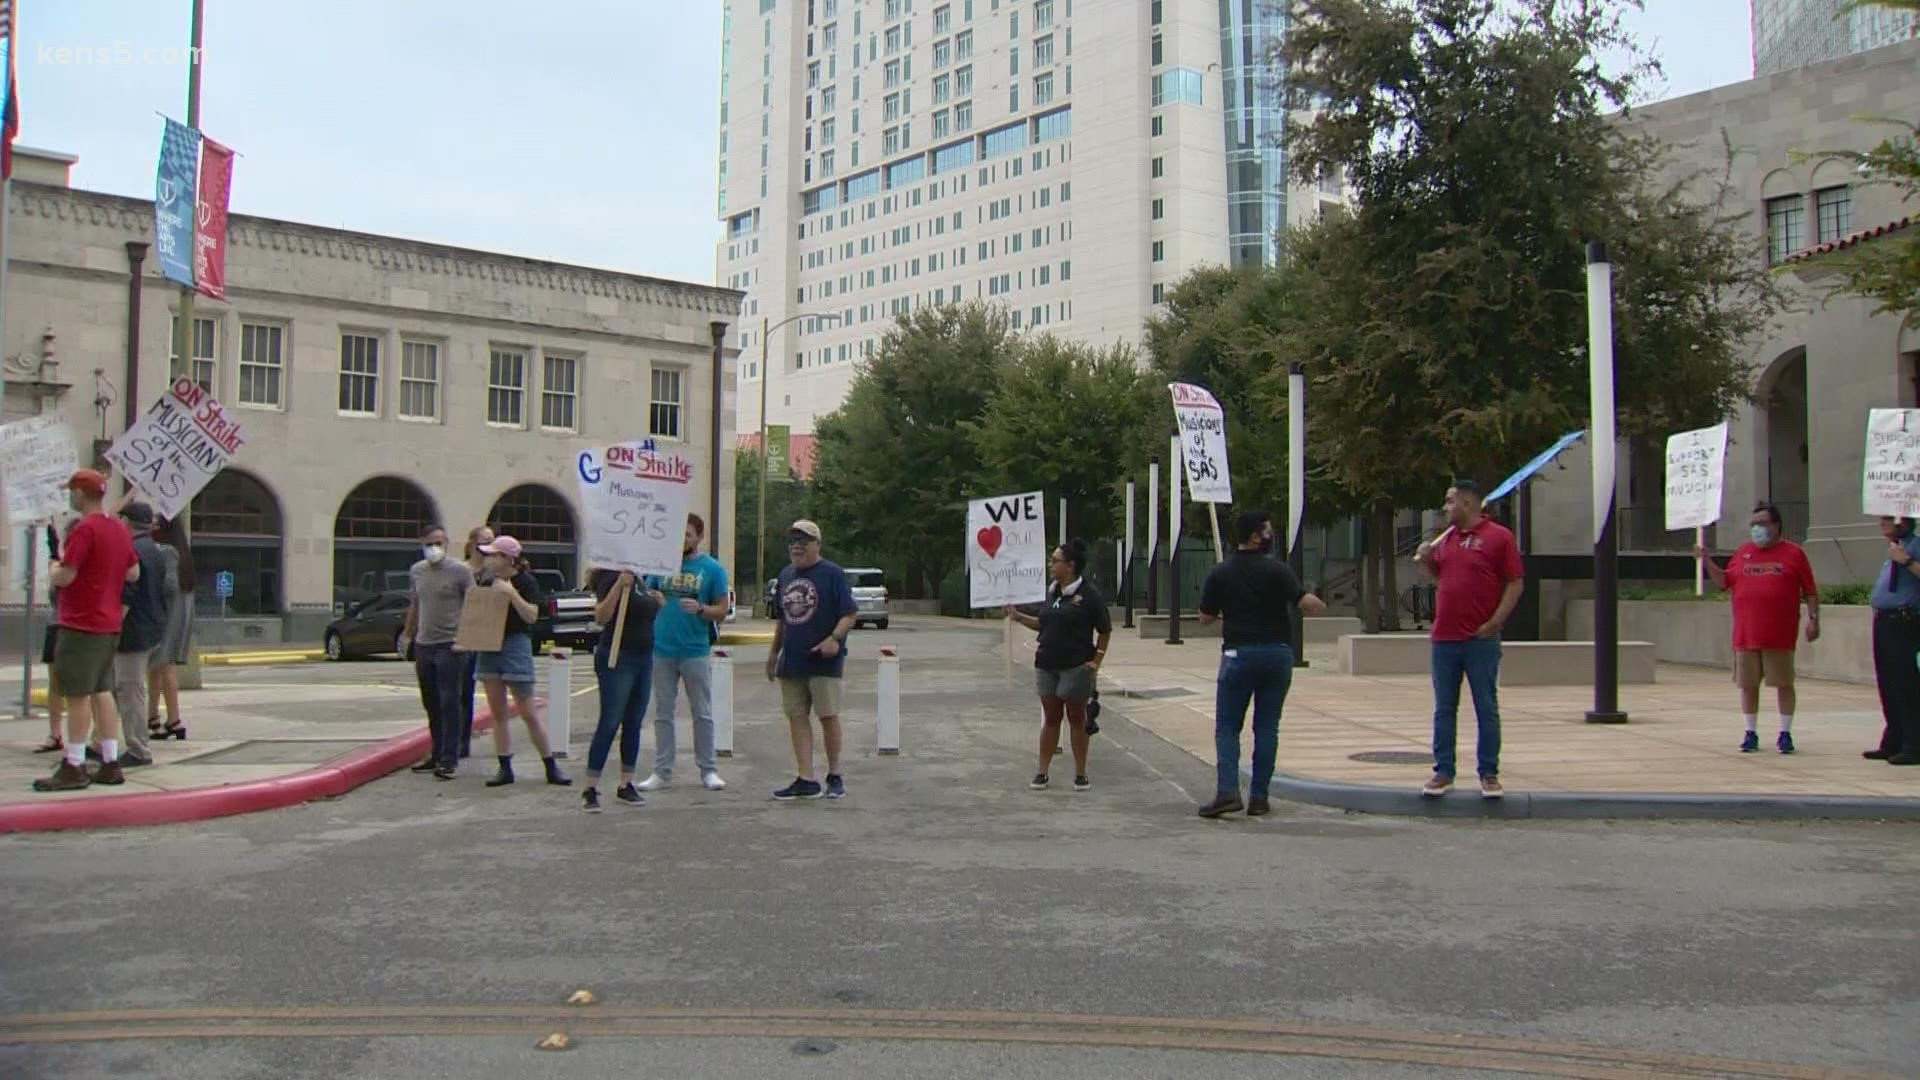 KENS 5's Matt Houston explains what's at stake if both sides can't find common ground.